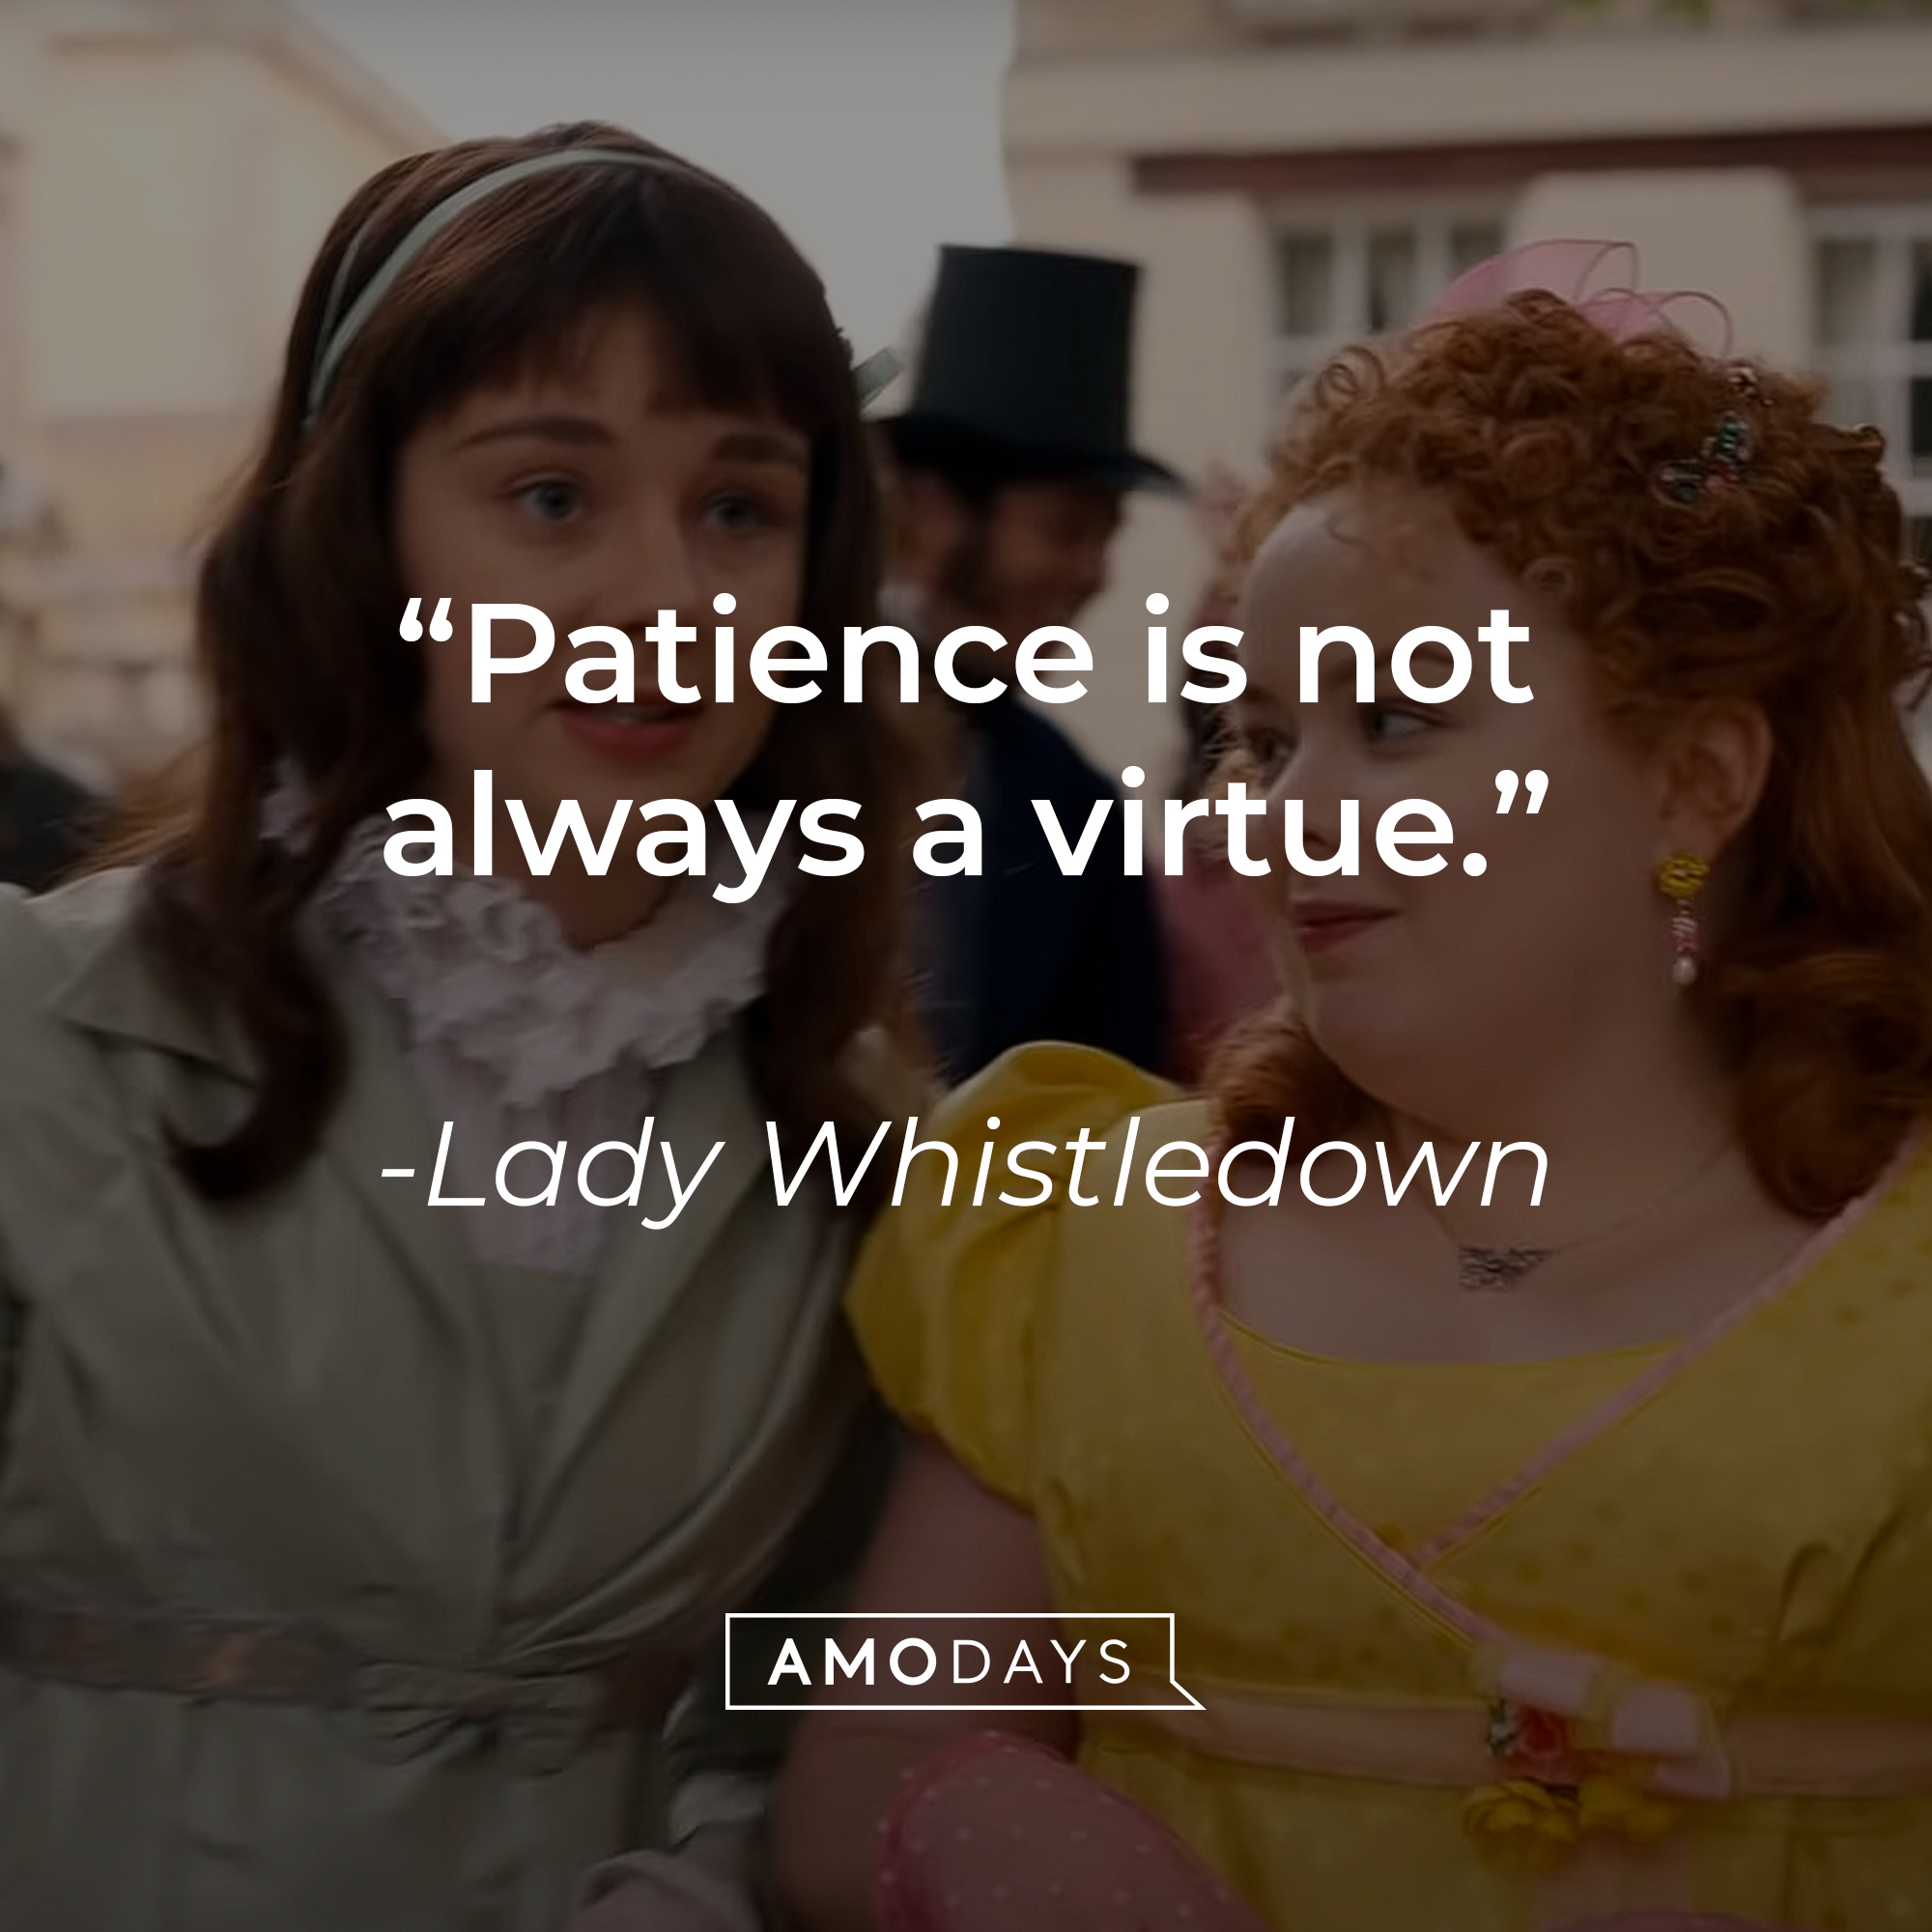 Lady Whistledown's quote: "Patience is not always a virtue." | Source: Youtube.com/Netflix